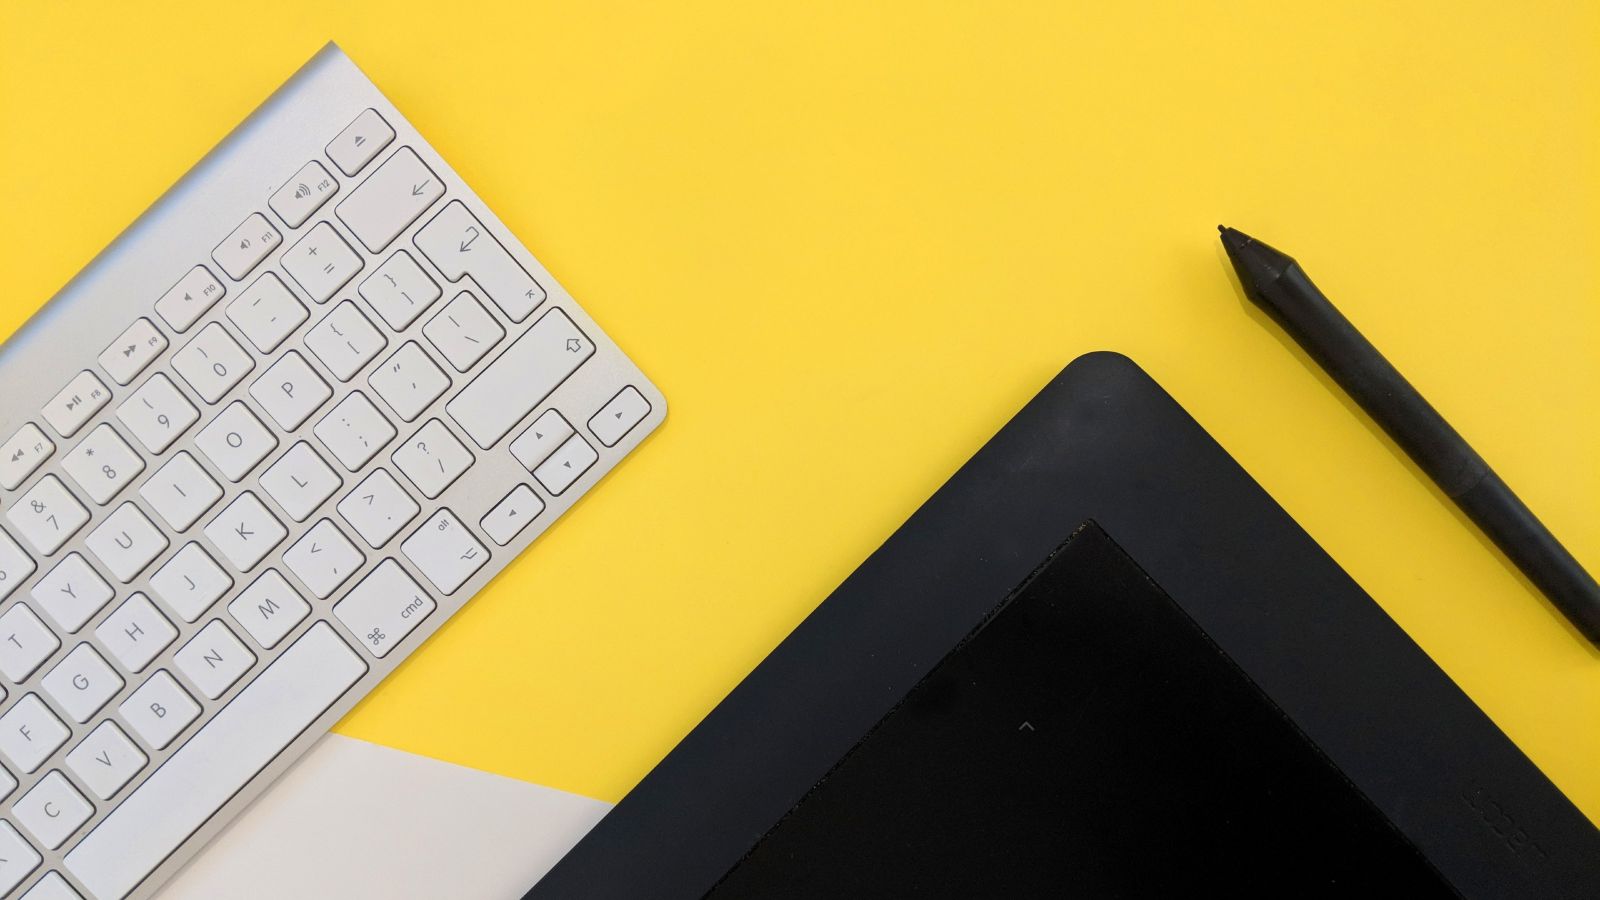 A keyboard and a tabled on a yellow surface.